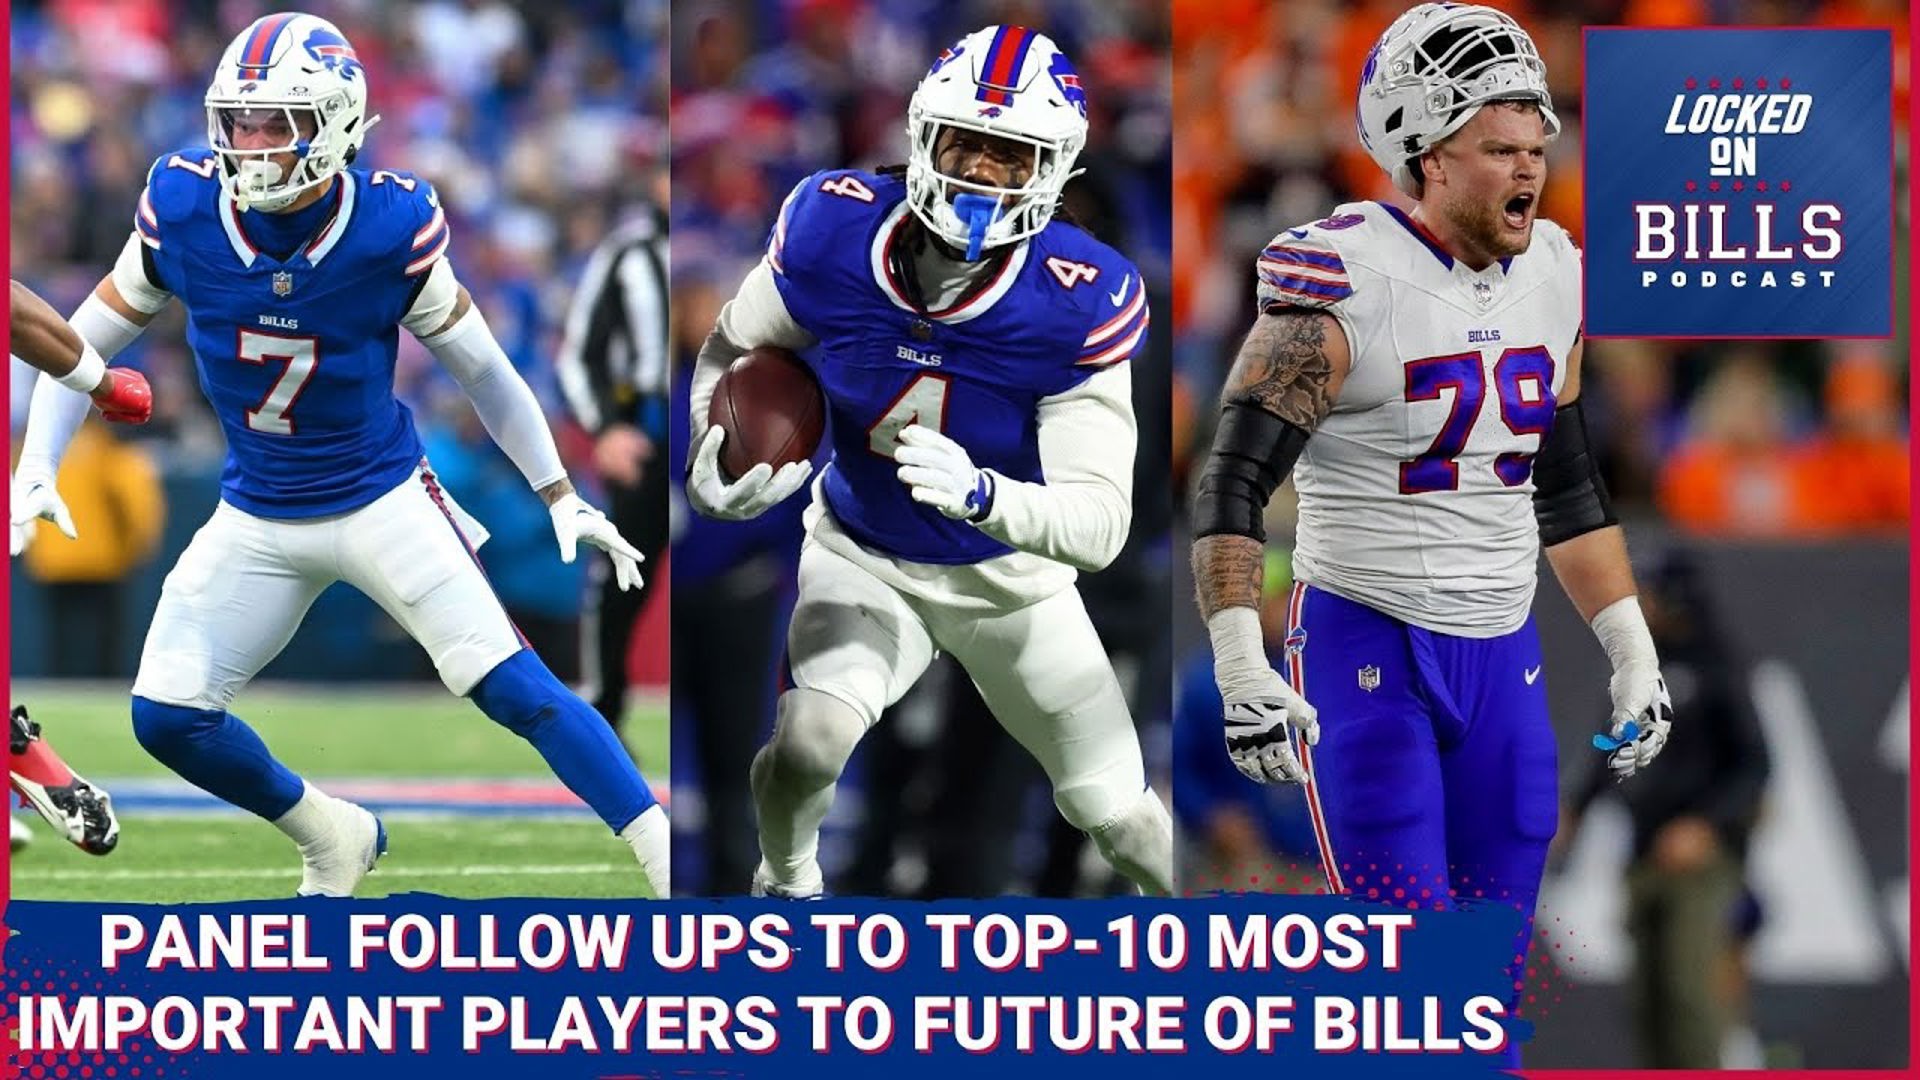 Panel Follow Up: The Consensus Top-10 Most Important Players to the Future of the Buffalo Bills